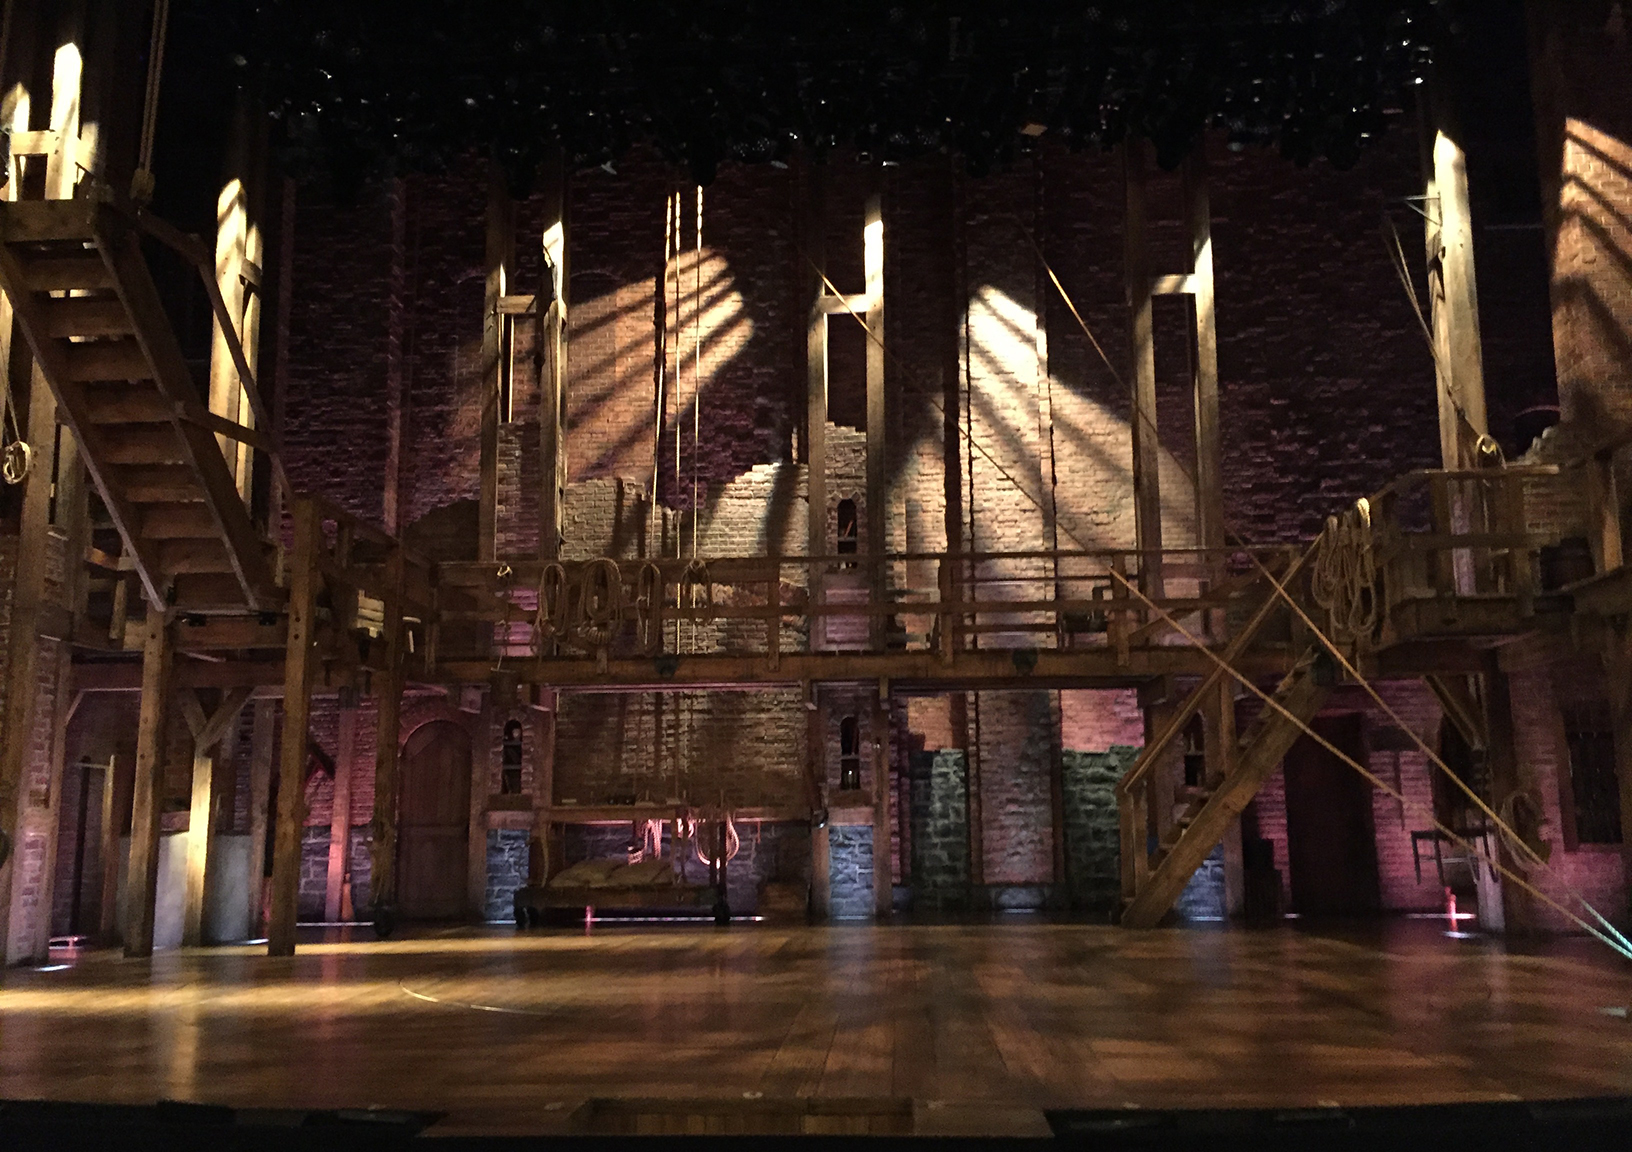 Hamilton: bare stage, before show begins